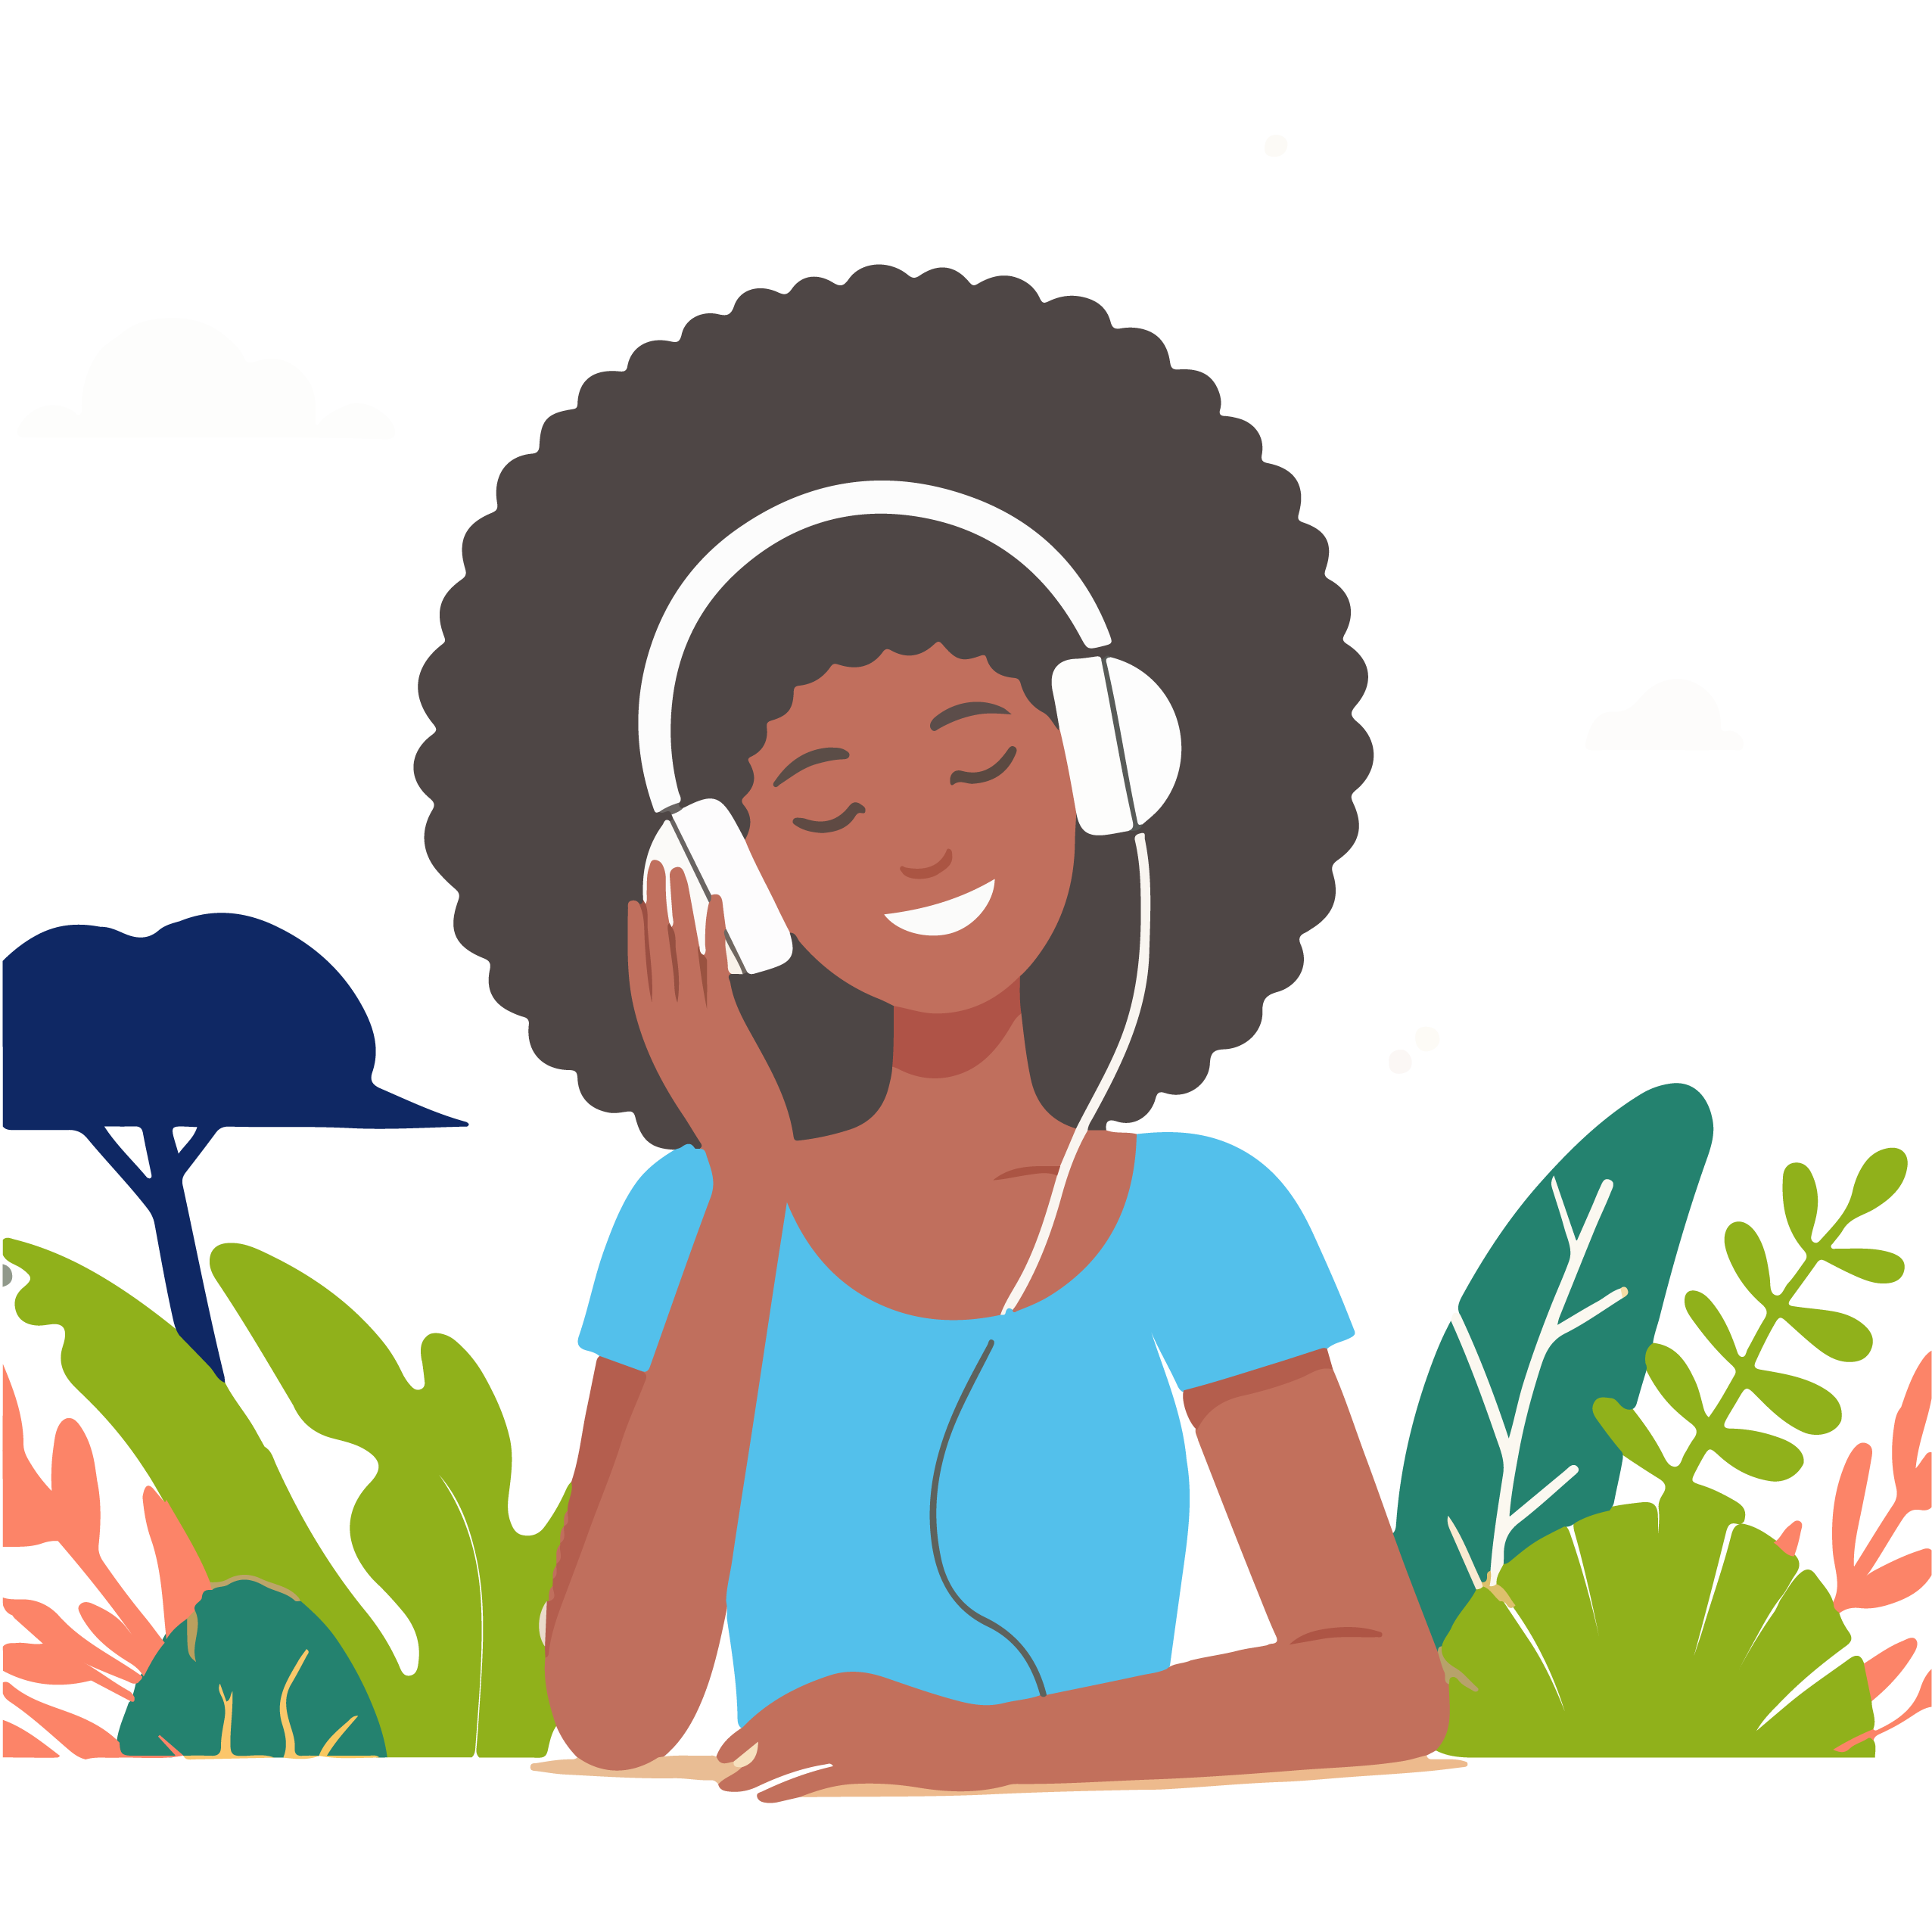  The artwork shows a woman with medium dark skin tone and a curly afro smiling with her eyes closed, wearing white head phones and holding one of the headphones on the side of her head. 